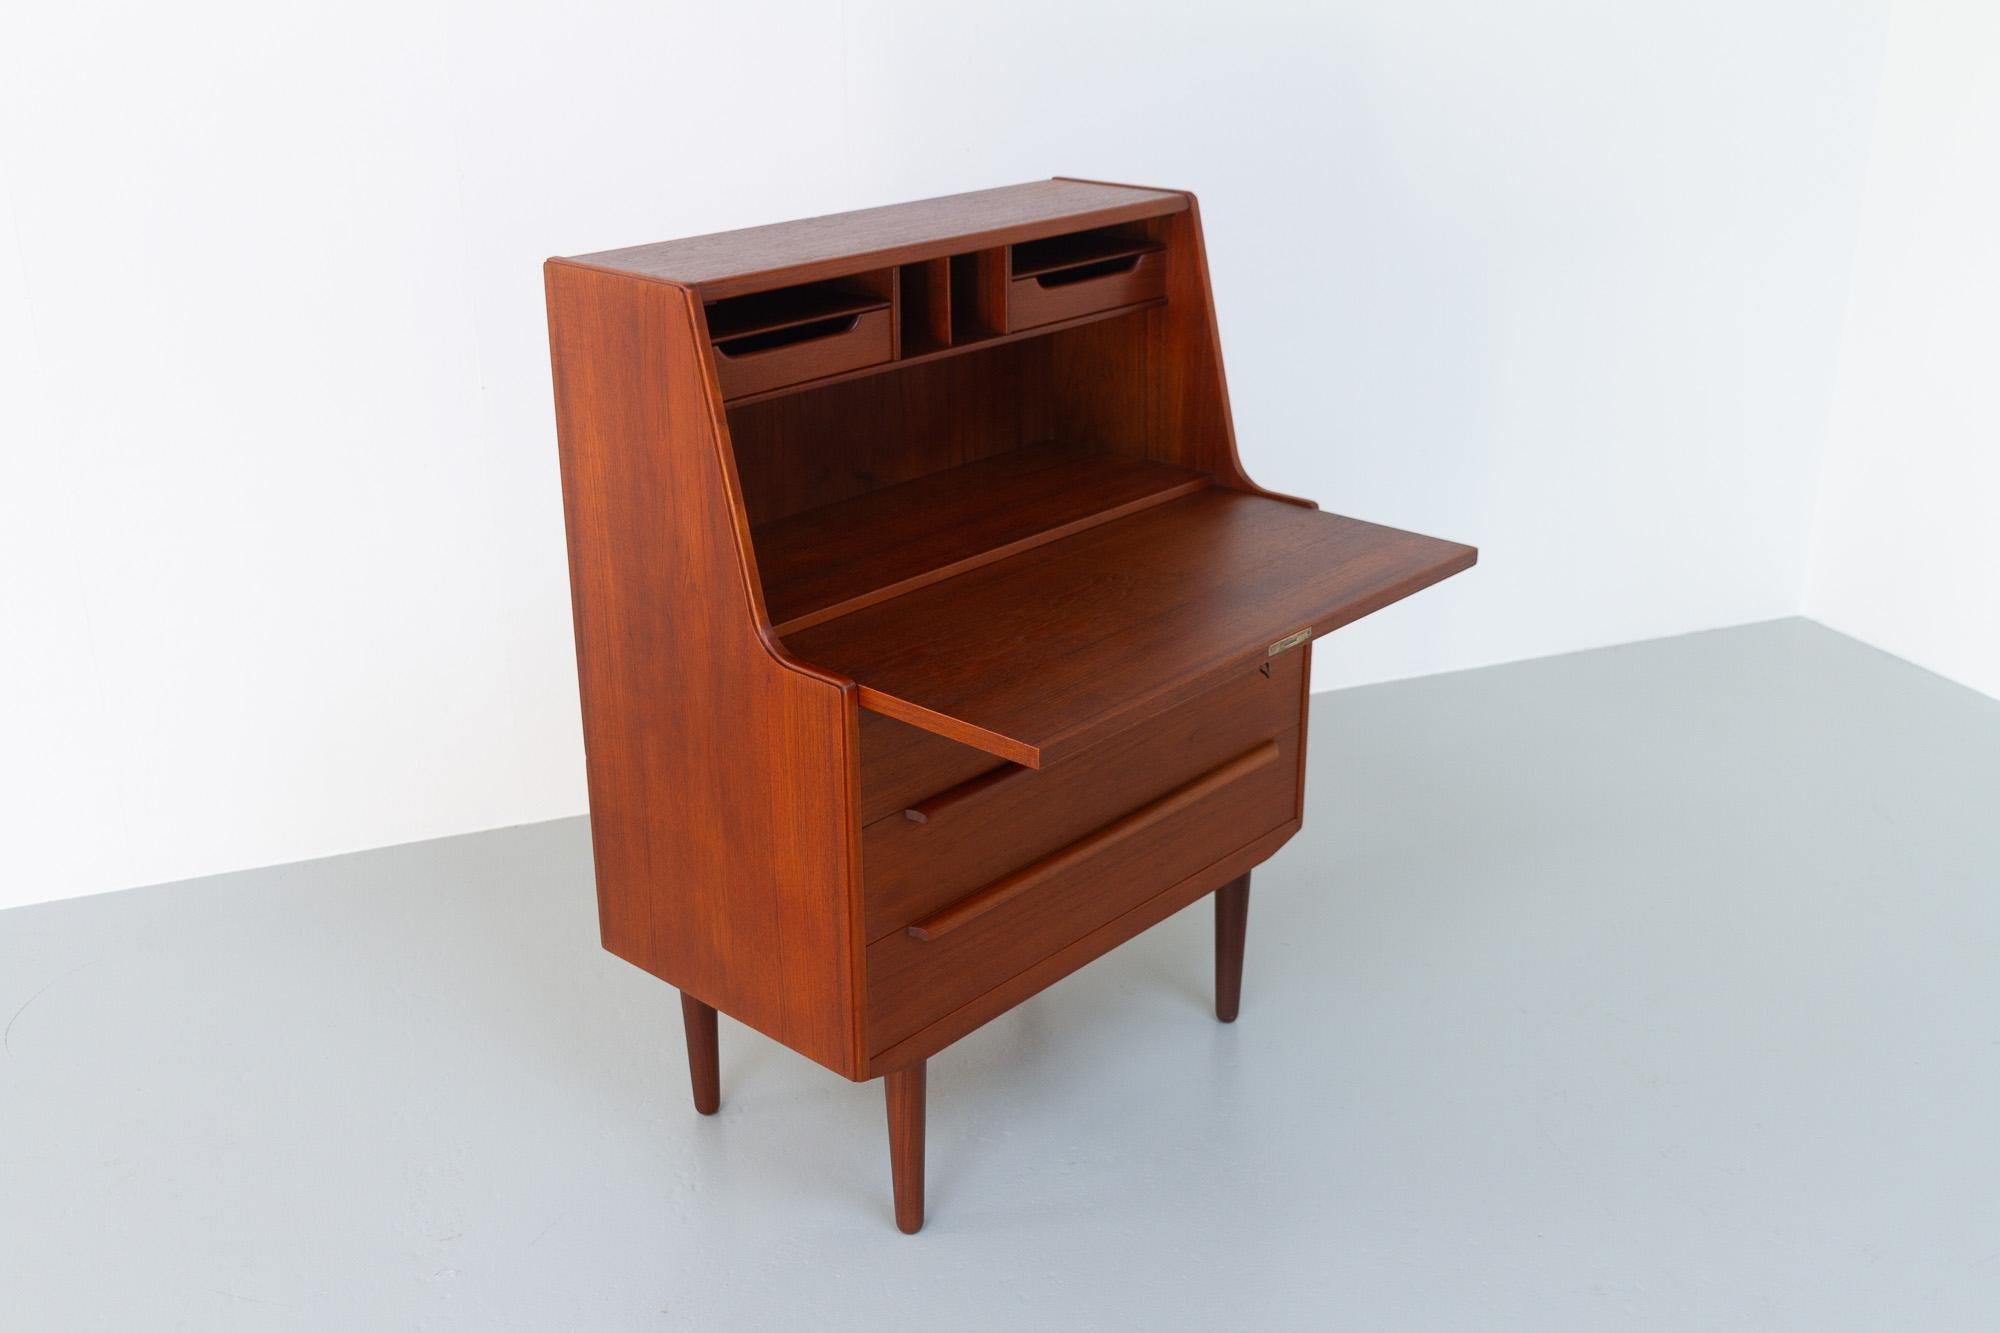 Vintage Danish Teak Secretary Desk by Sigfred Omann for Ølholm, 1960s.
Classic and elegant Scandinavian modern secretaire designed by Sigfred Omann for Ølholm Møbelfabrik, Denmark in the 1960s.
Three wide drawers with long sculpted pulls in solid